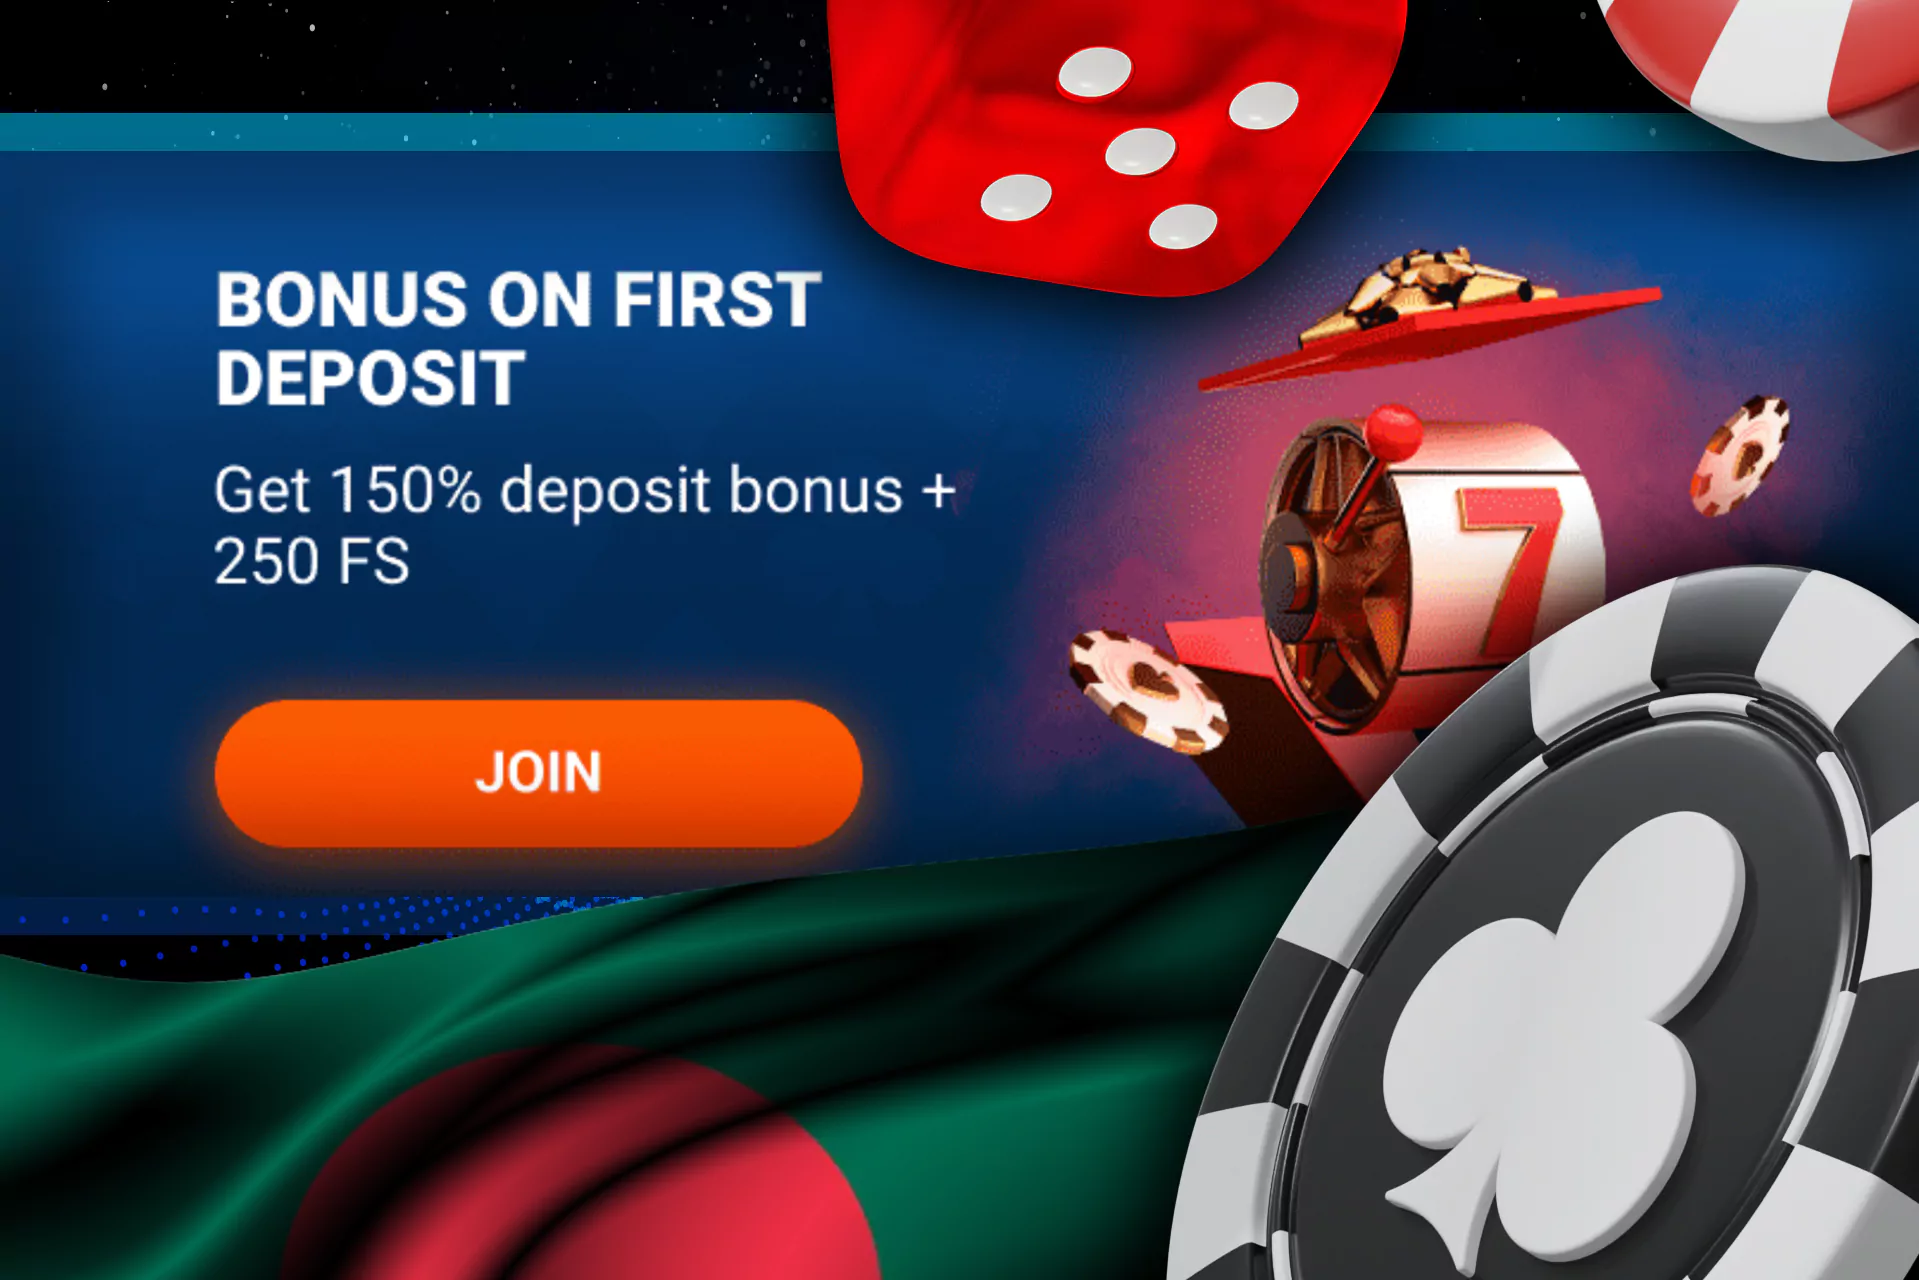 First deposit bonus for the casino +150% and 250 free spins.